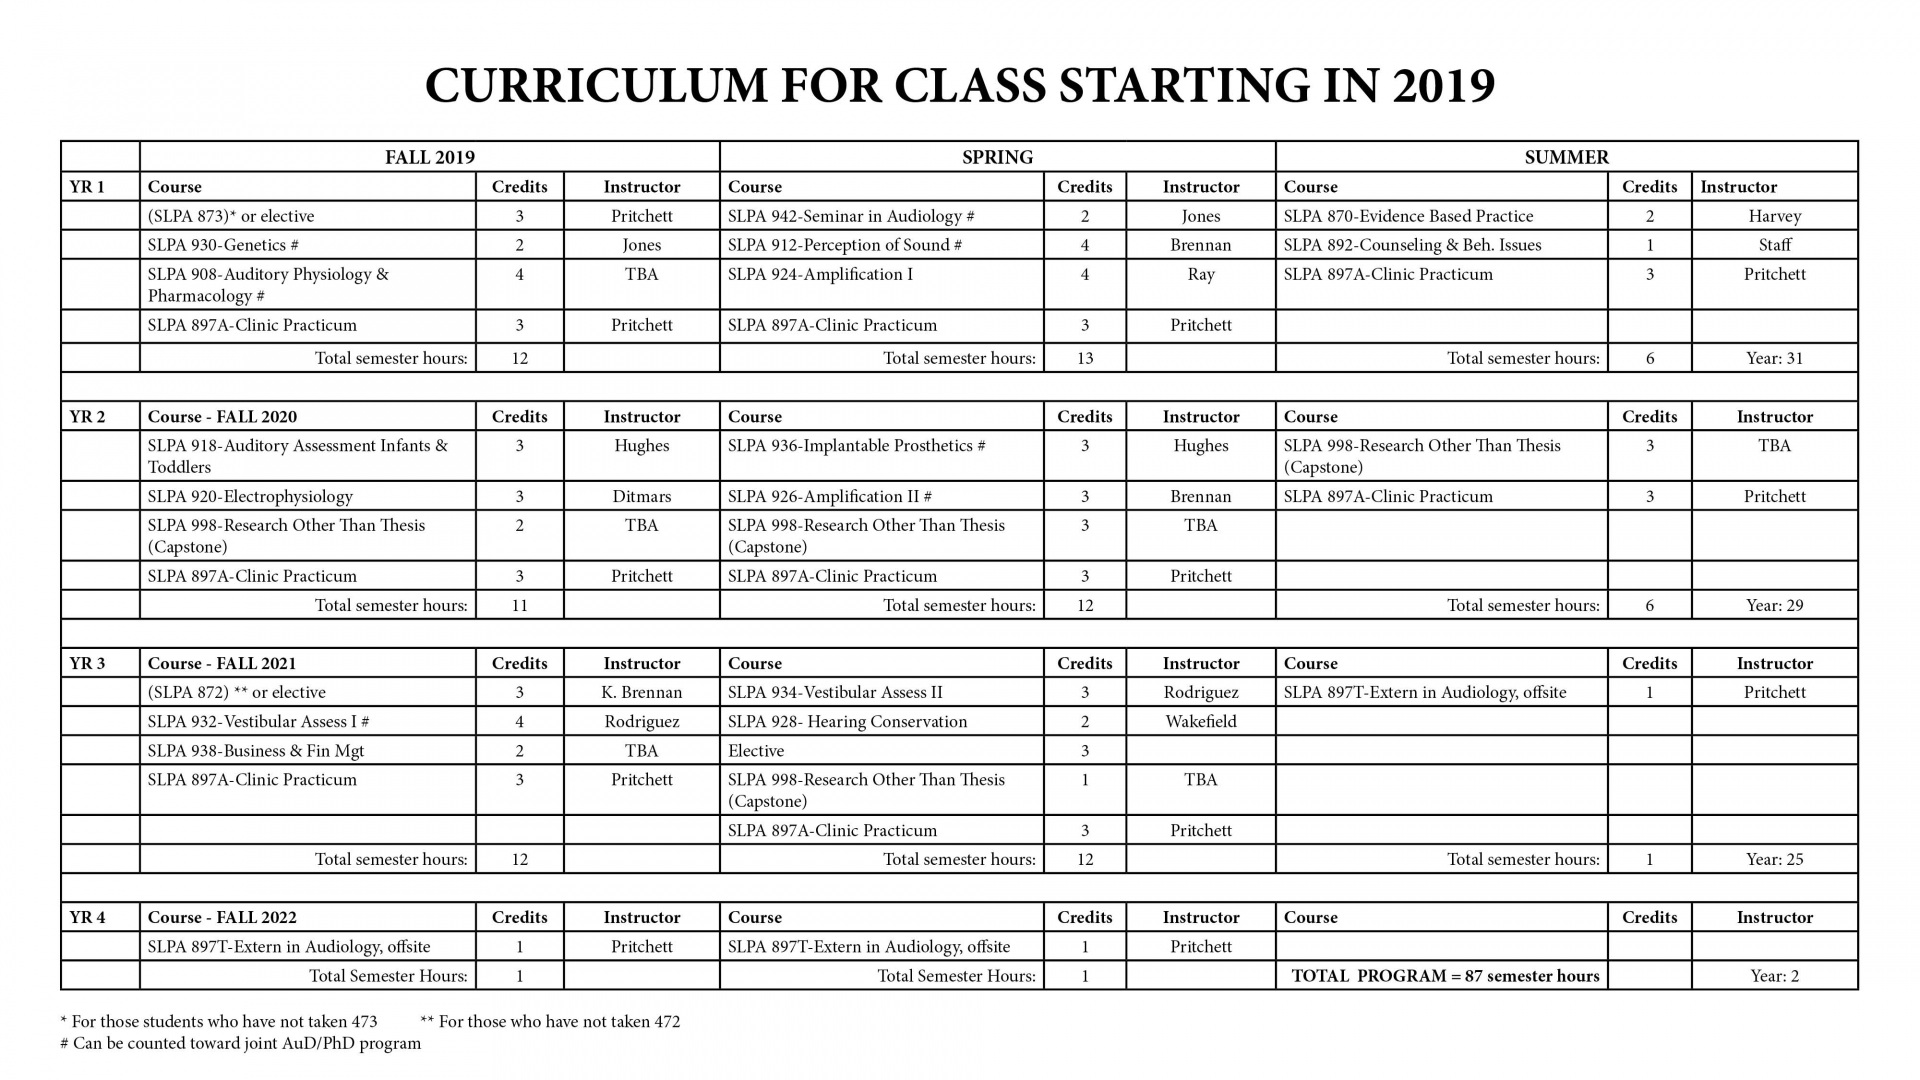 Curriculum for Class Starting in 2019